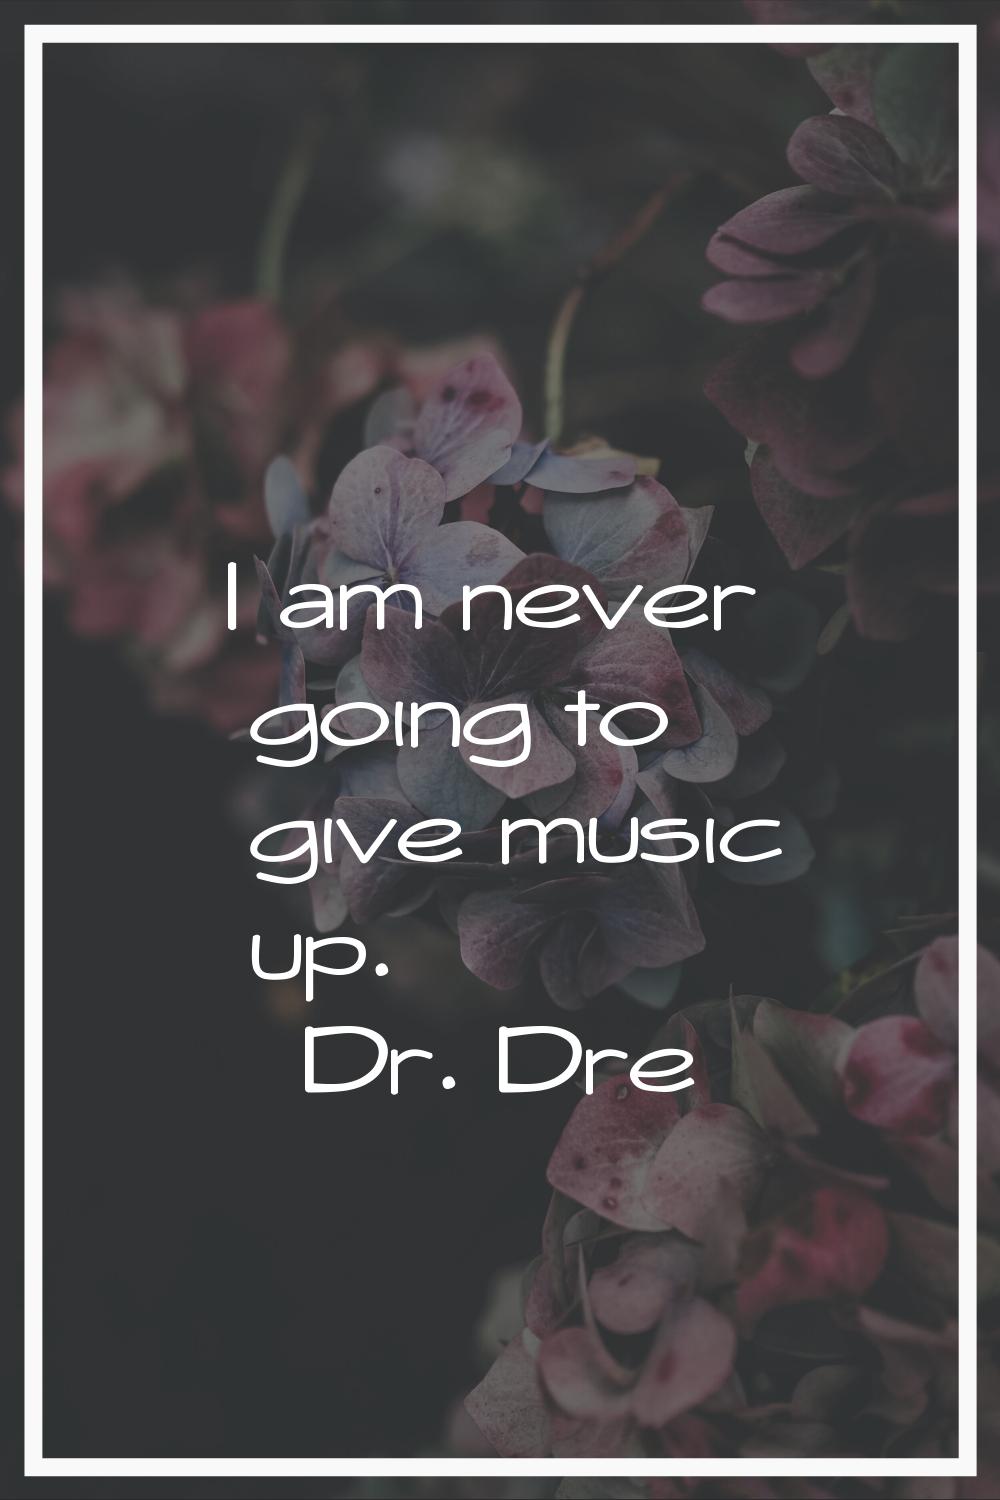 I am never going to give music up.